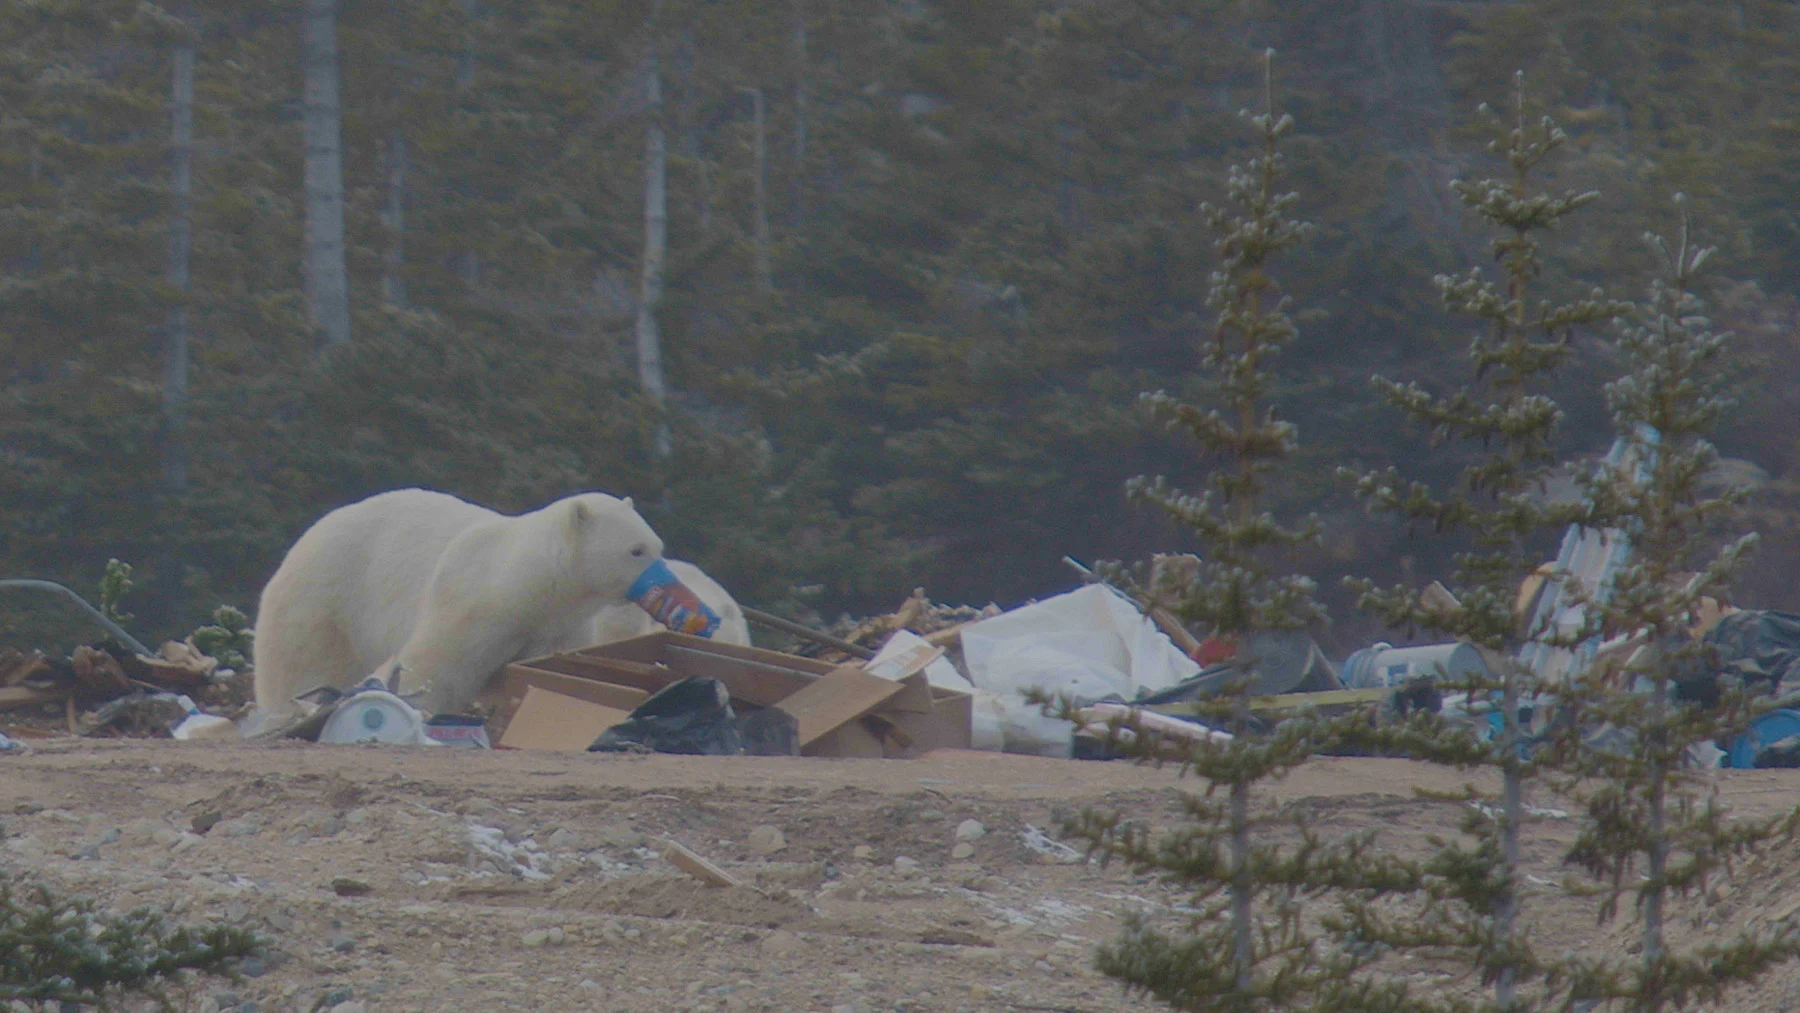 A small waste site can be a big problem for polar bears, especially mothers and cubs. Research shows that cubs who learned to seek garbage as a food source return year after year into adulthood. Minimizing access to waste is a preventative strategy to keep this type of habituation from happening.  (Polar Bears International)